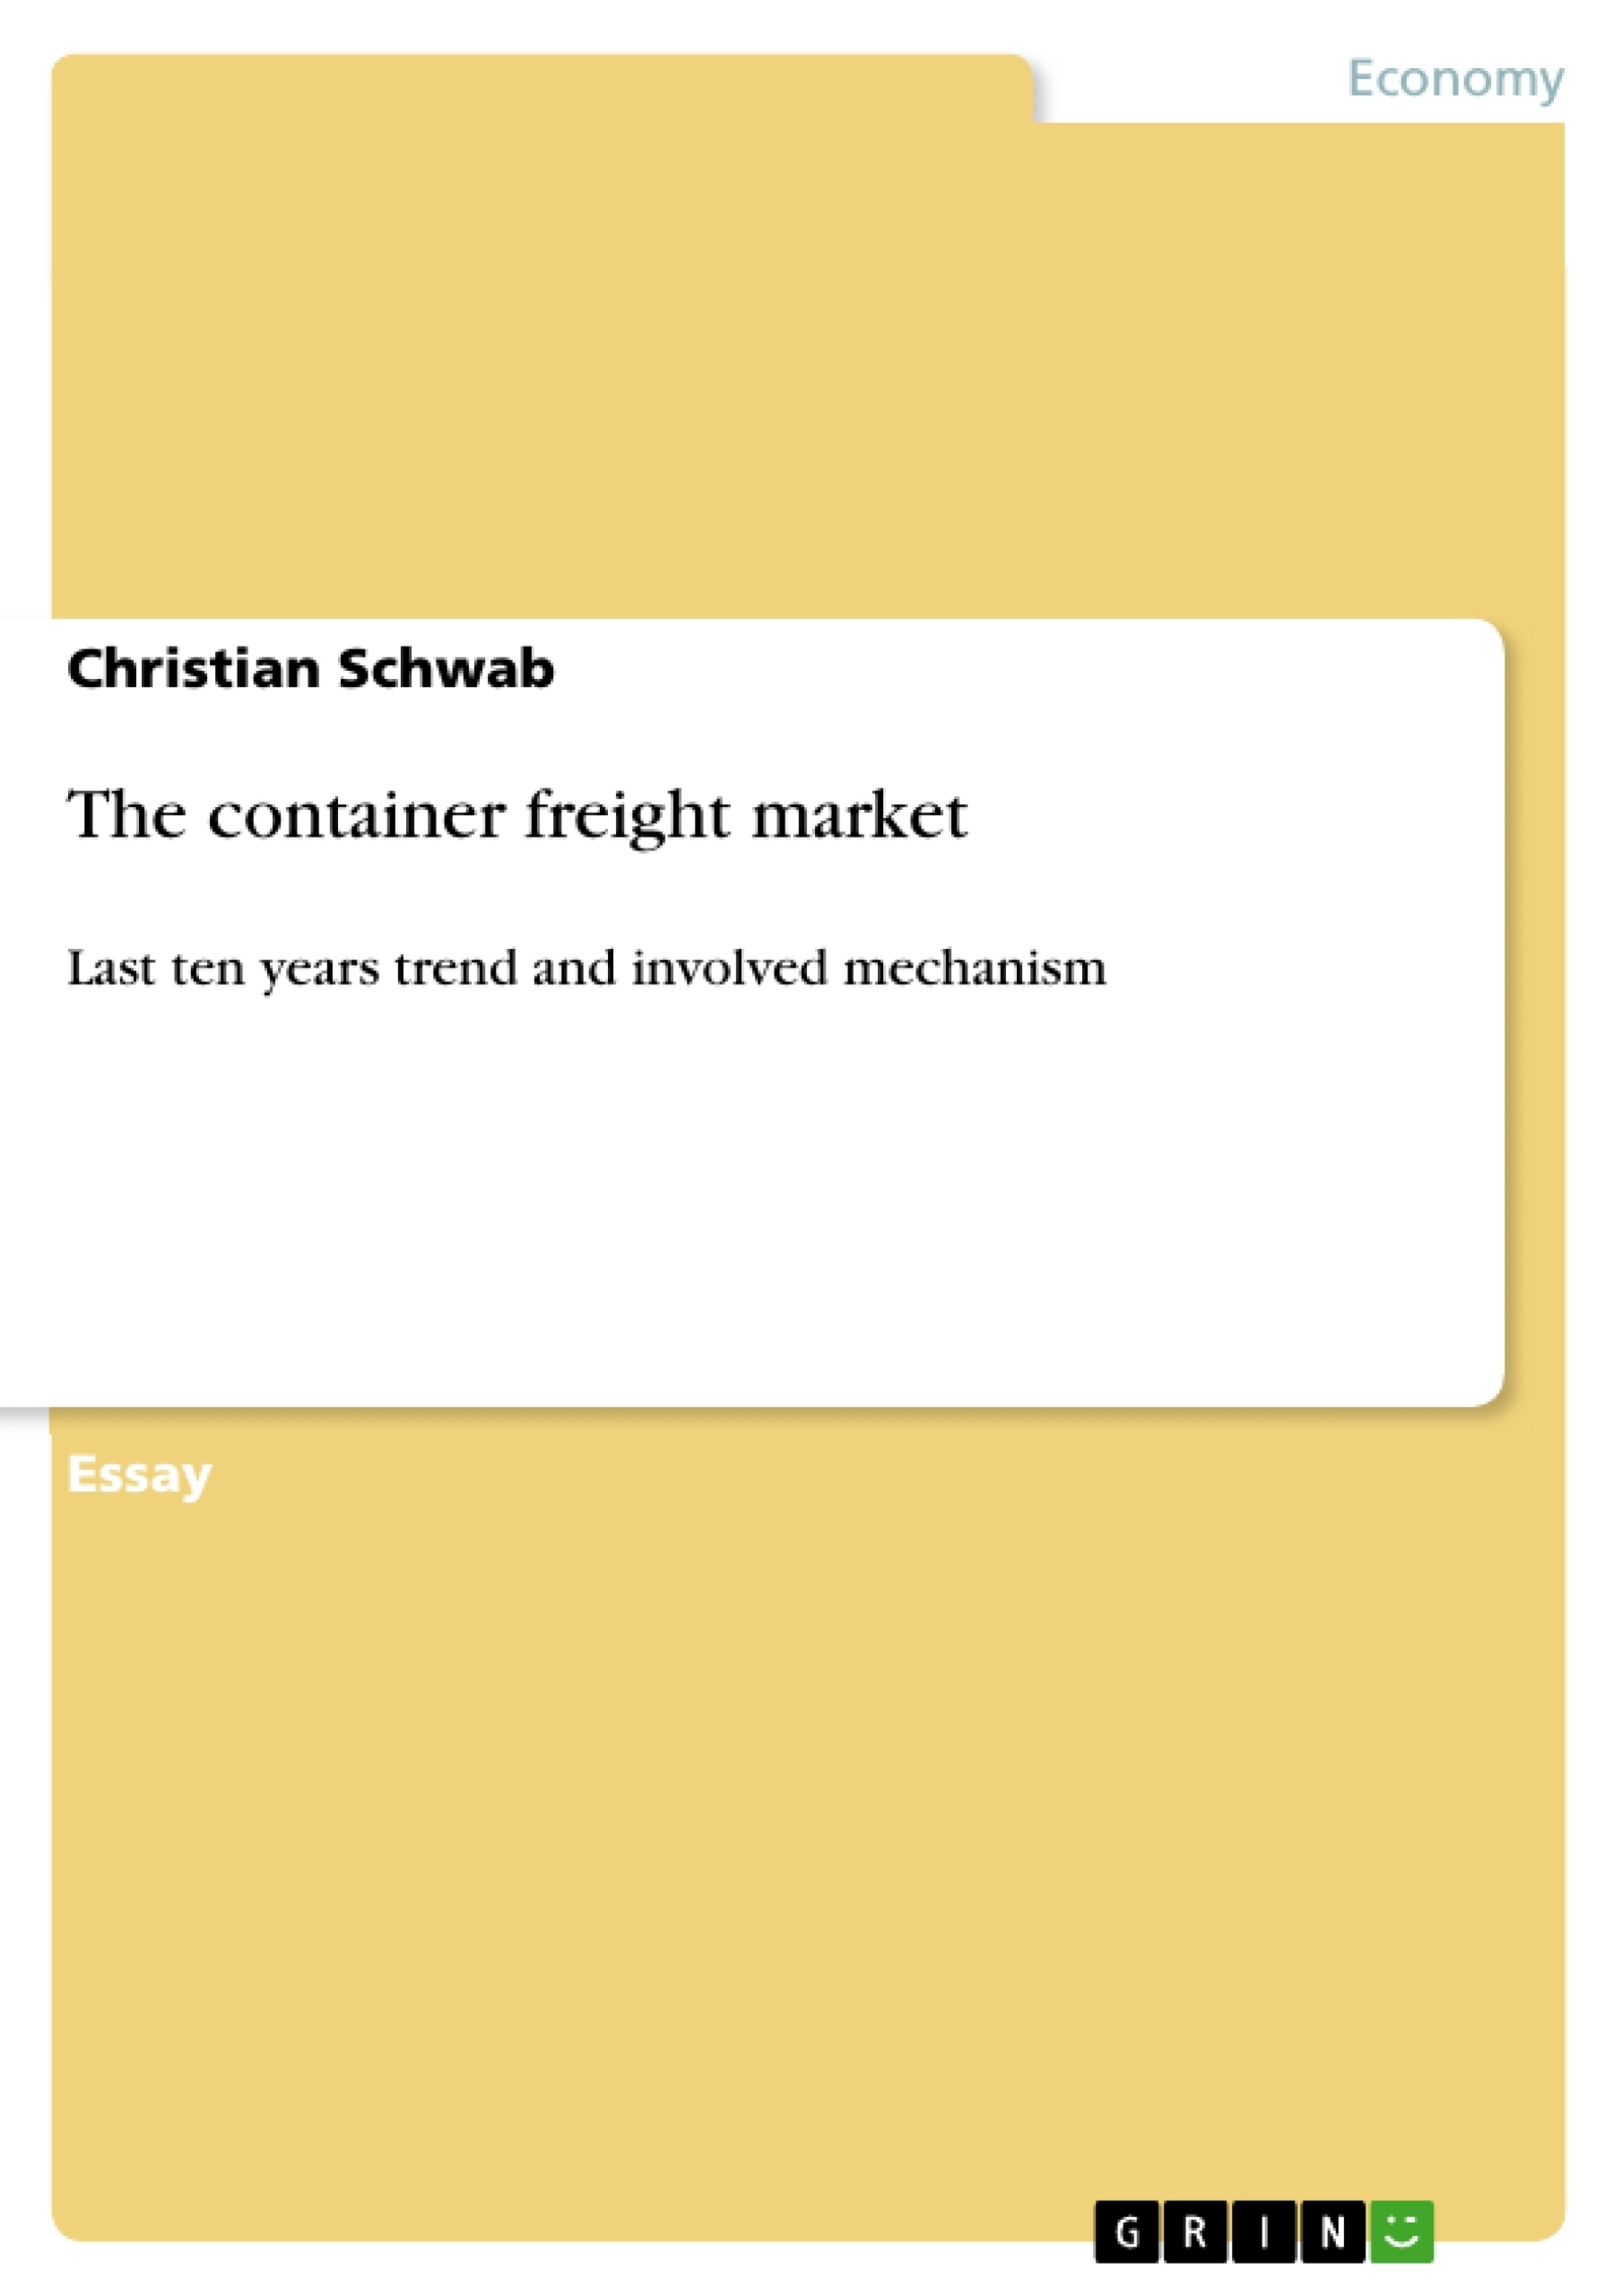 Title: The container freight market